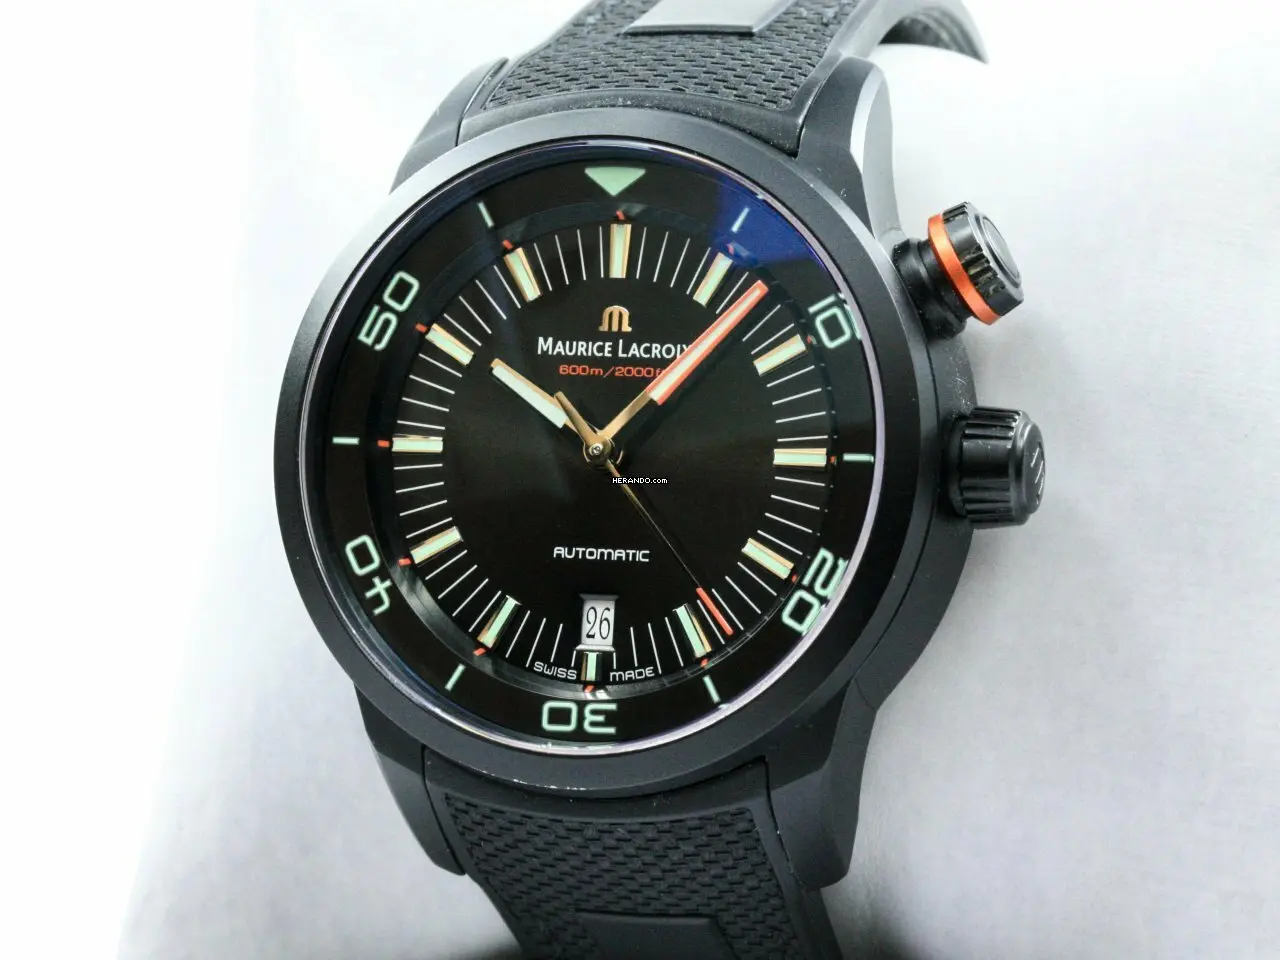 watches-324653-27904631-h7xkftvz7m6vk86ld6a1o21n-ExtraLarge.webp